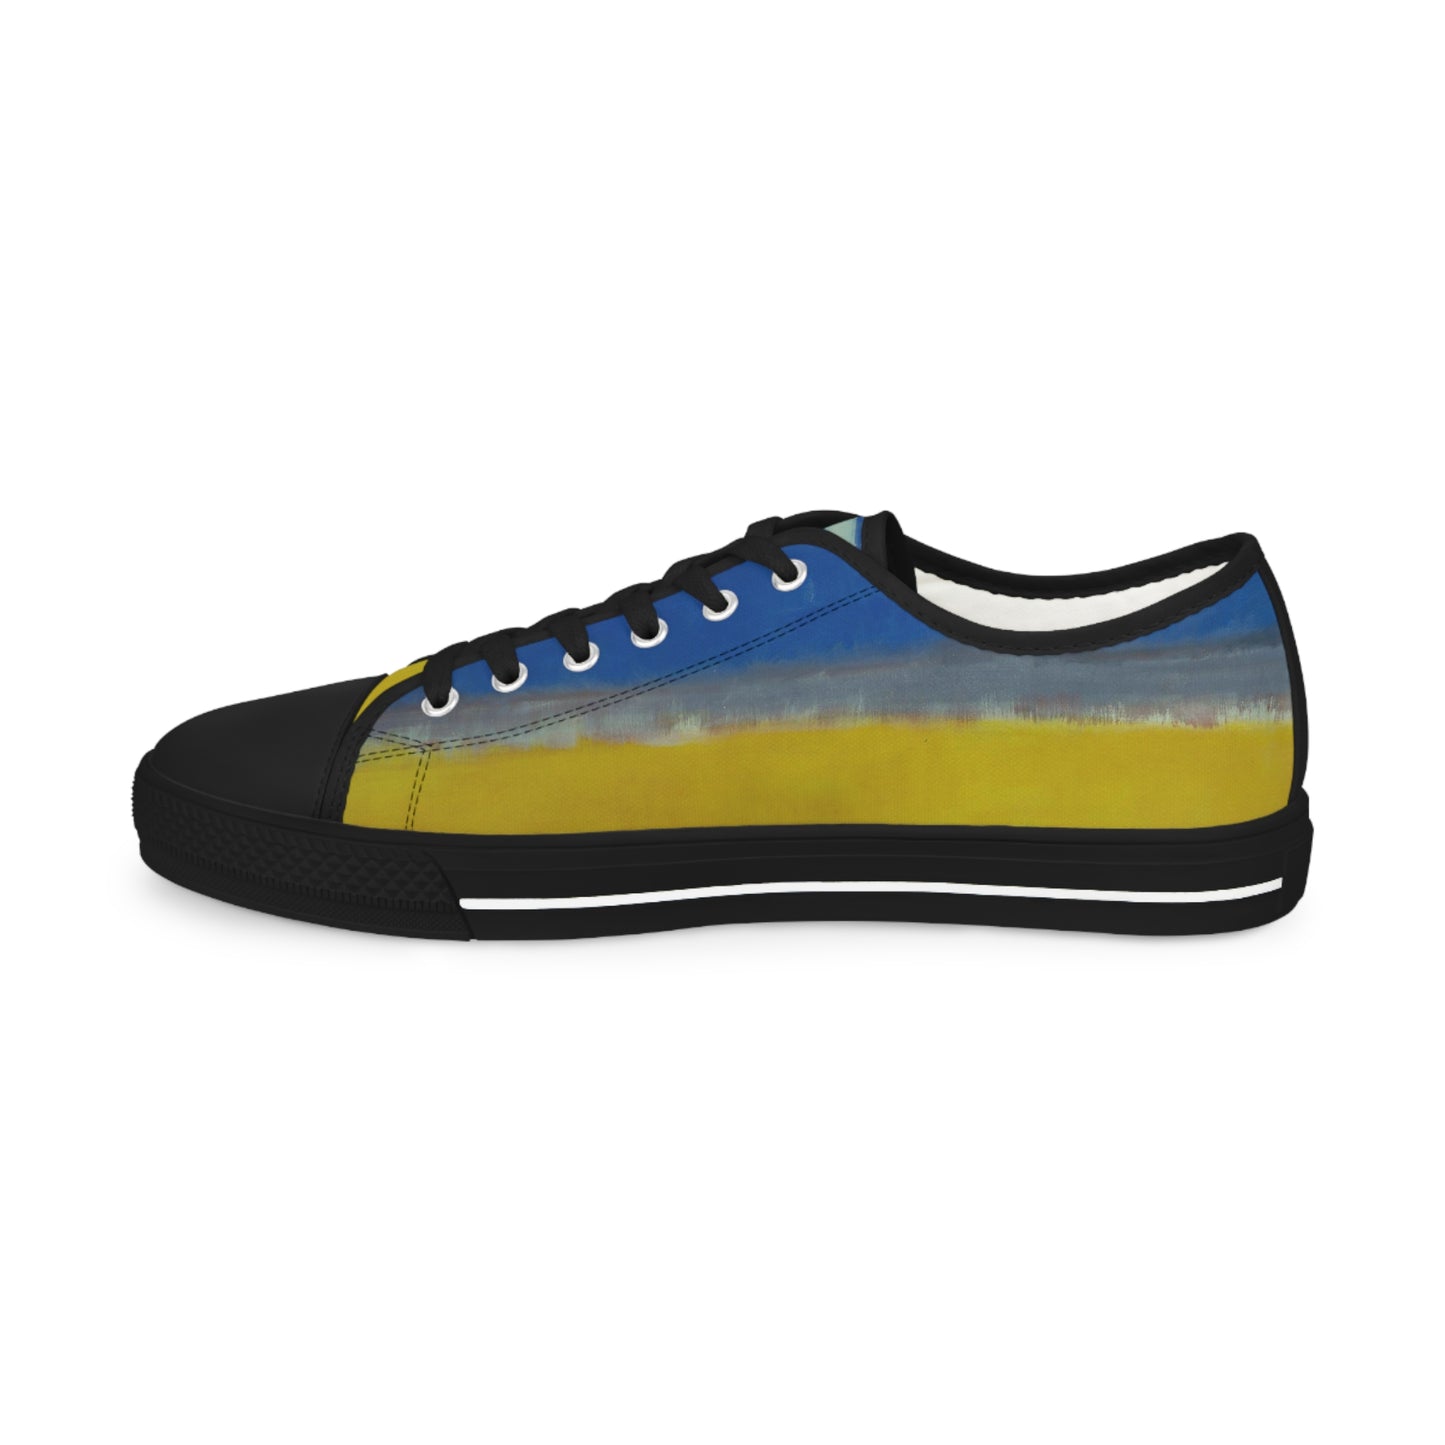 MARK ROTHKO - ABSTRACT - LOW TOP ART SNEAKERS FOR HIM